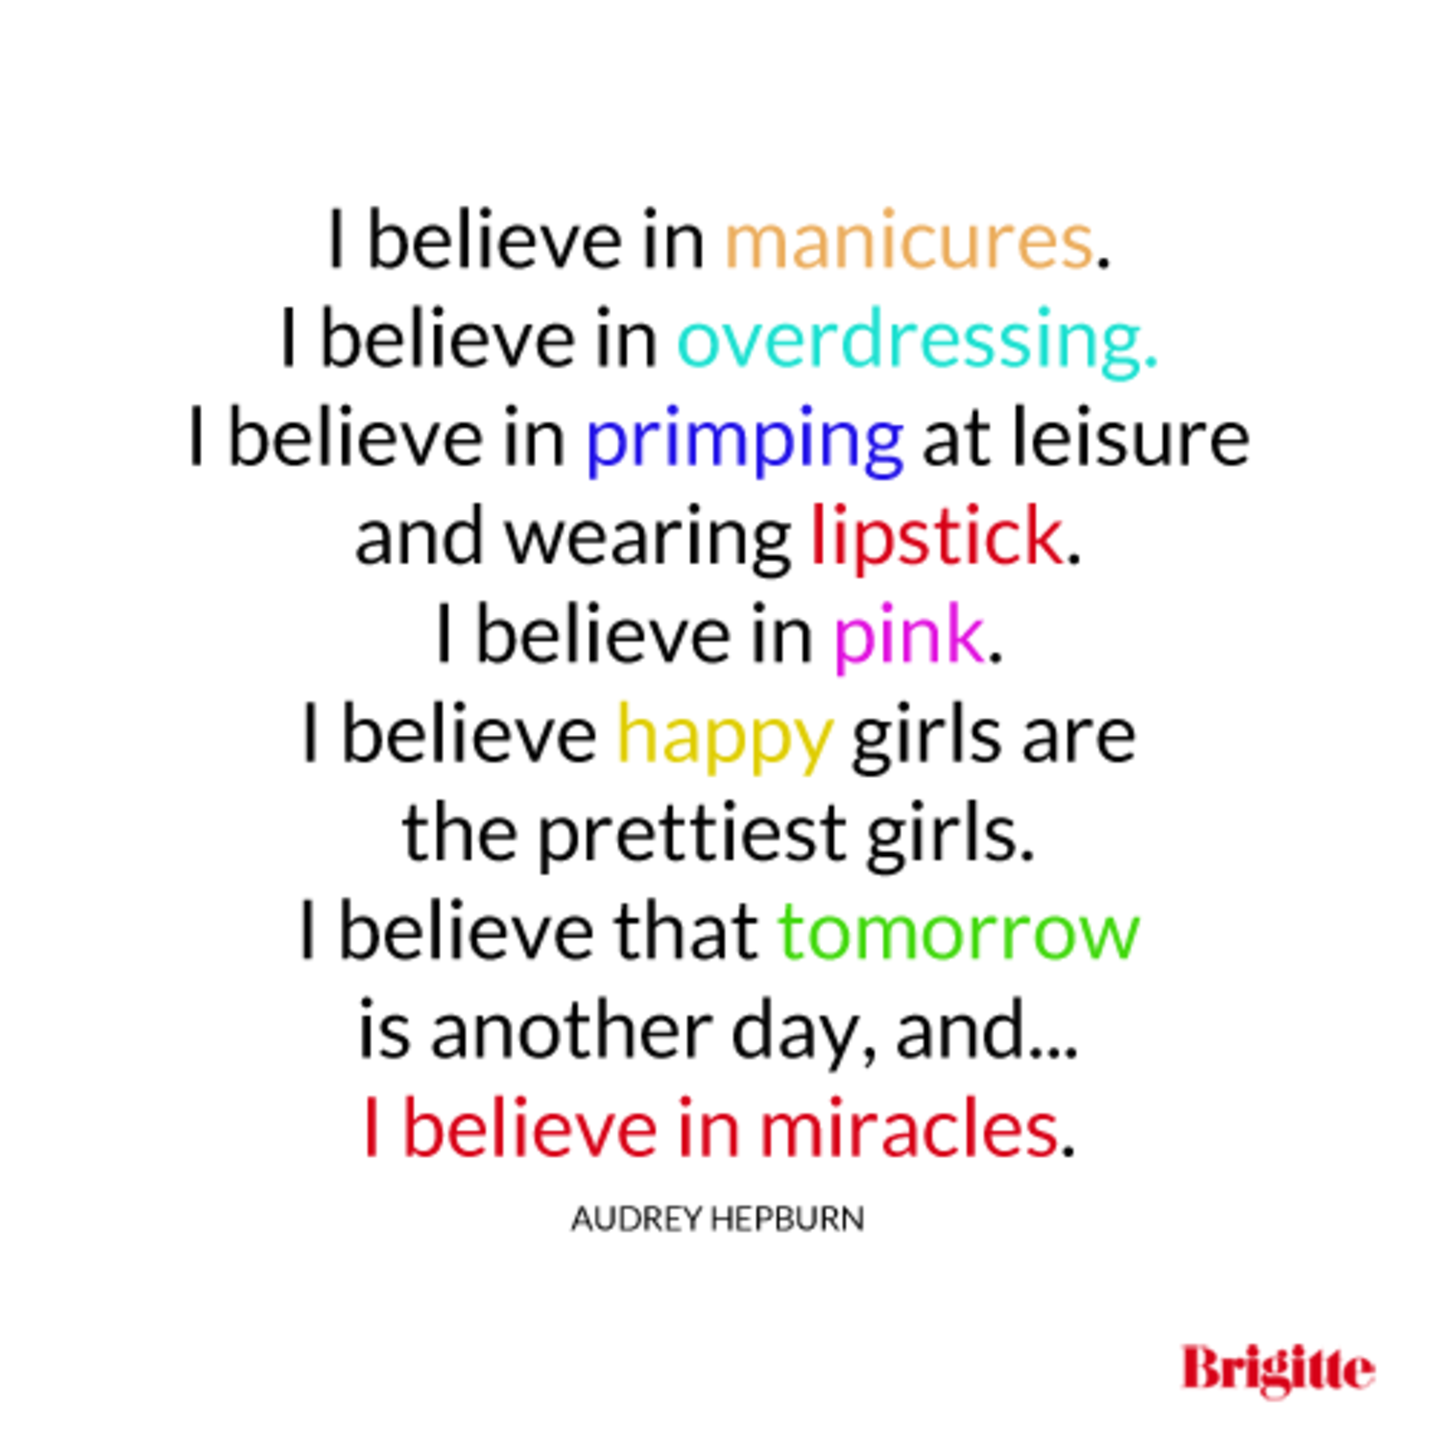 I believe in manicures. I believe in overdressing. I believe in primping at leisure and wearing lipstick. I believe in pink. I believe happy girls are the prettiest girls. I believe that tomorrow is antoher day, and ... I believe in miracles.